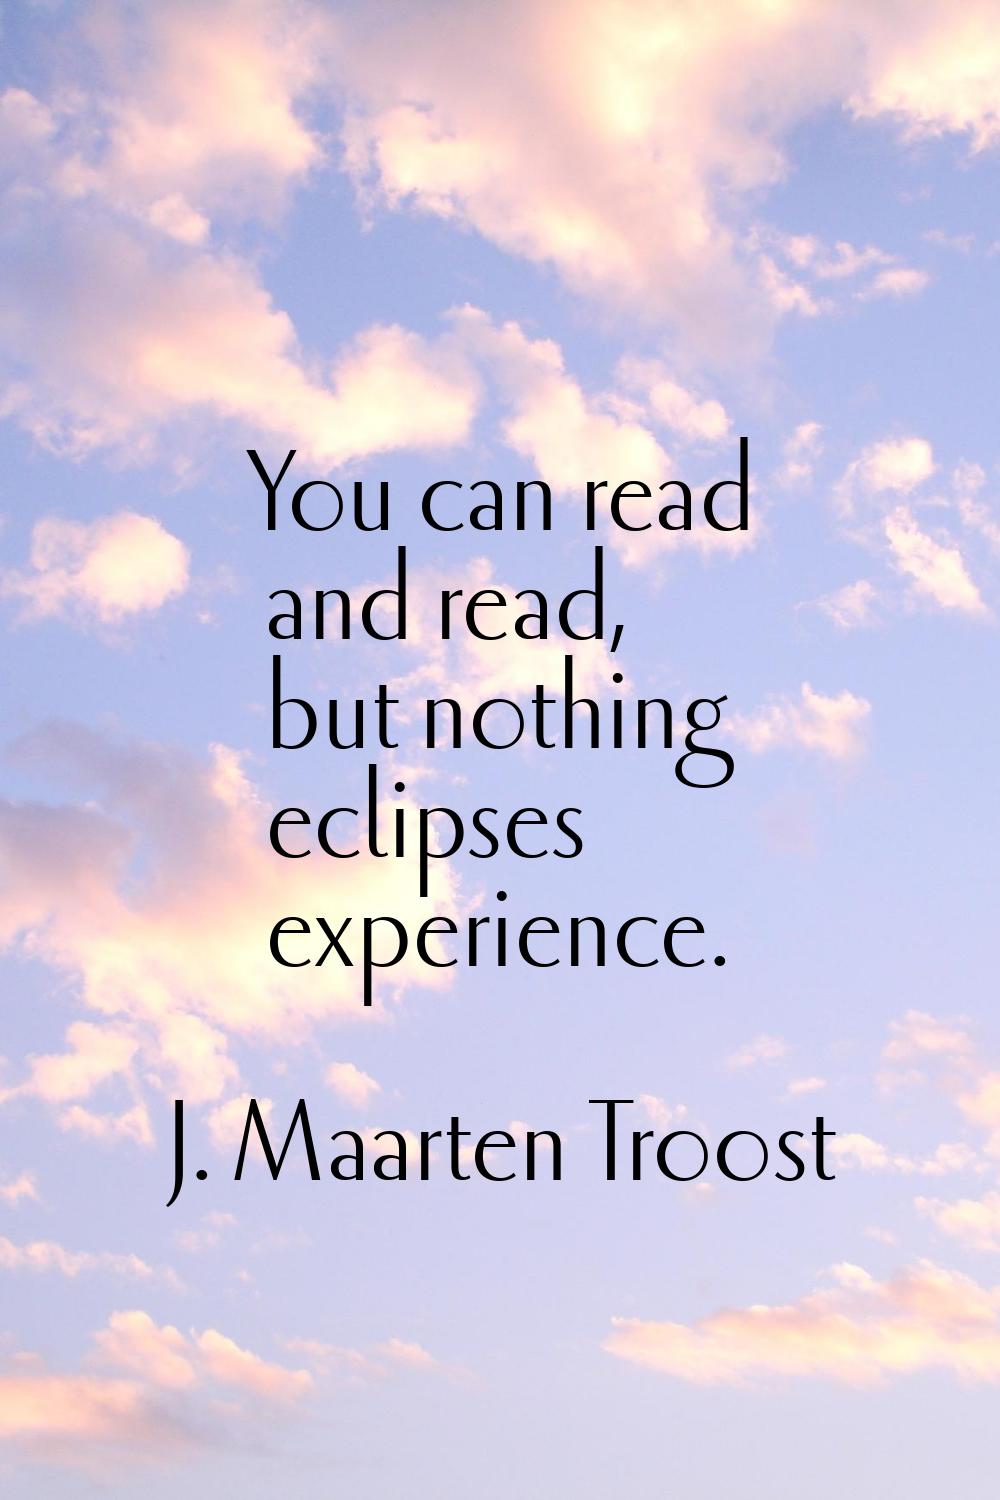 You can read and read, but nothing eclipses experience.